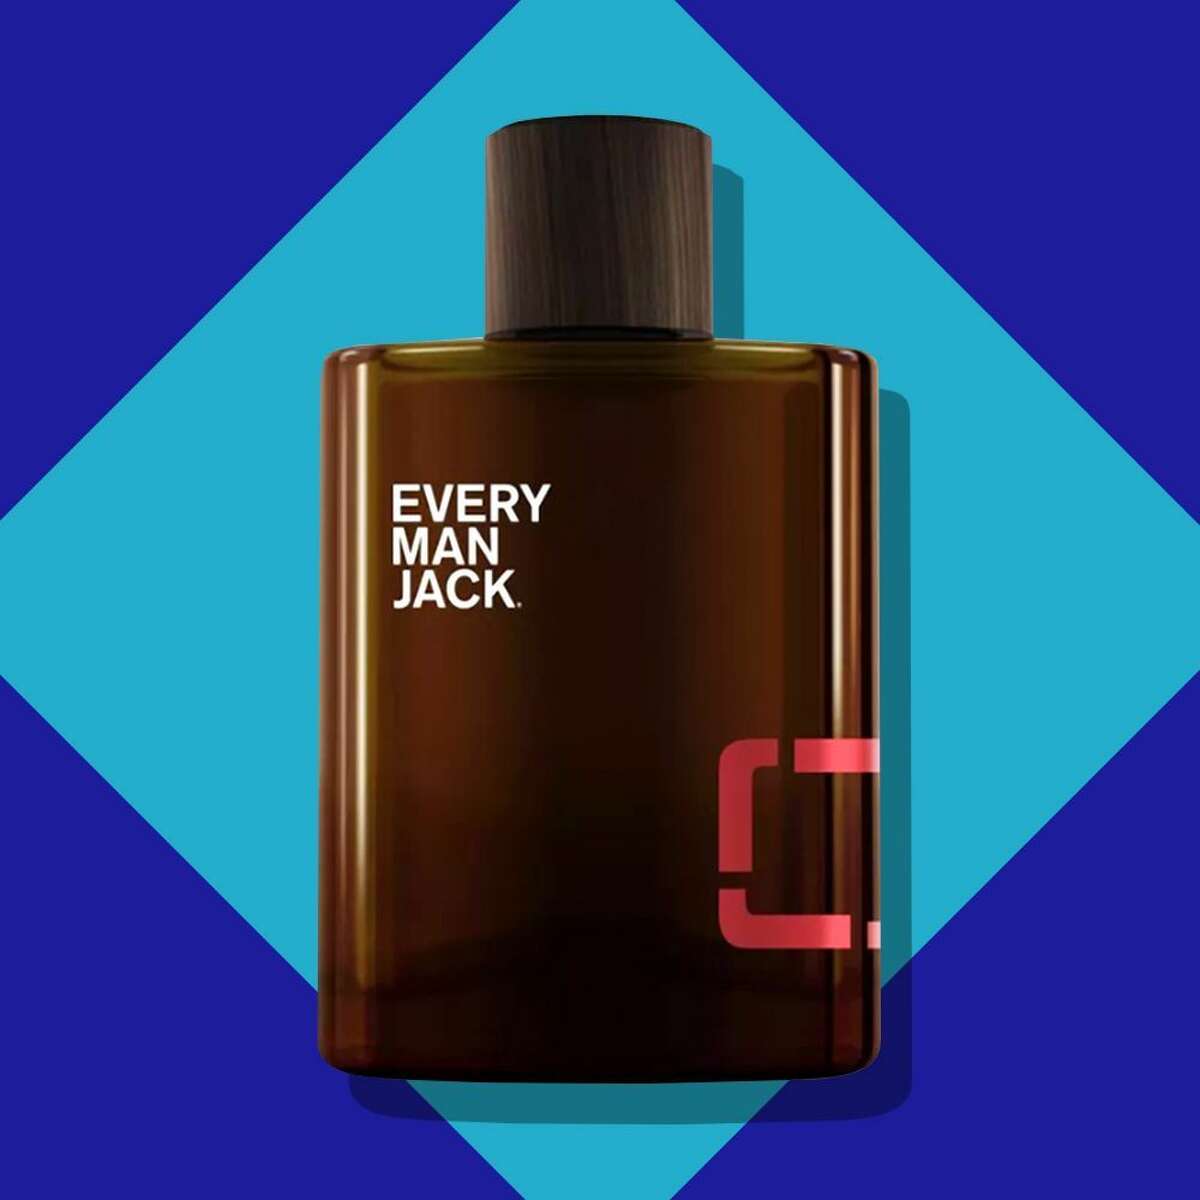 Every Man Jack Cedarwood : $19.99 Shop Now Finding an affordable fragrance you like can be a game-changer. Replenishing your supply when you run out won't break the bank, which means you can feel free to spray away. Every Man Jack's cedarwood product line is one of their most popular and the cologne is a must-have for fans of the brand. Pro Tip: EMJ is an ever-evolving brand with so many new products on the horizon. However or wherever you might've discovered the brand, you may not be seeing the full scope of what they offer. Not every line is carried at every retailer. It's worth checking out their website to find out about the newest products or upcoming launches. More: Affordable Colognes That Still Smell Great